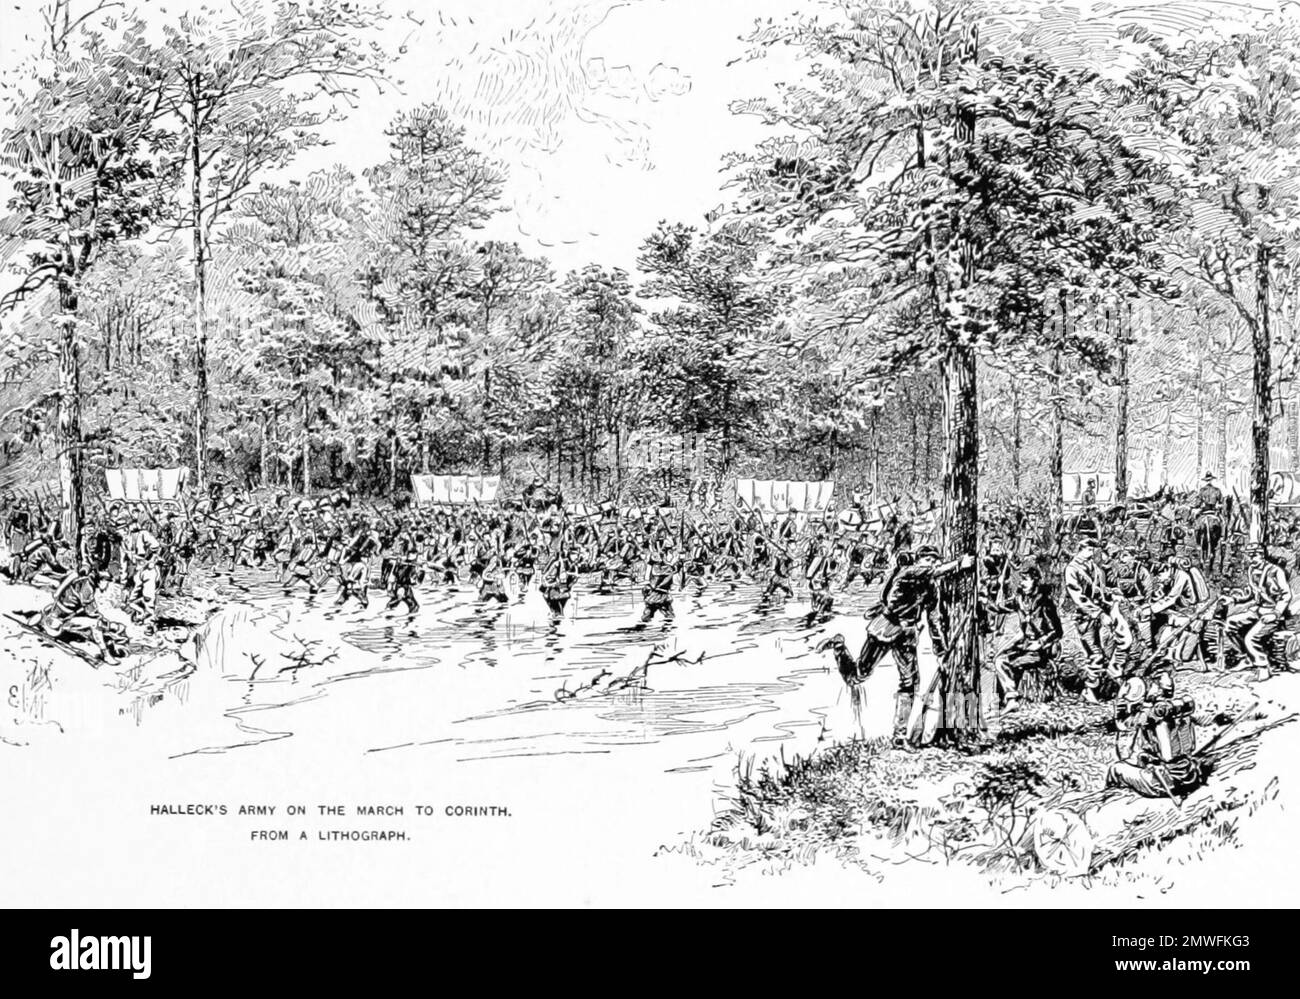 he siege of Corinth (also known as the First Battle of Corinth) was an American Civil War engagement lasting from April 29 to May 30, 1862, in Corinth, Mississippi. This image depicts General Halleck's army marching towards Corinth. Stock Photo